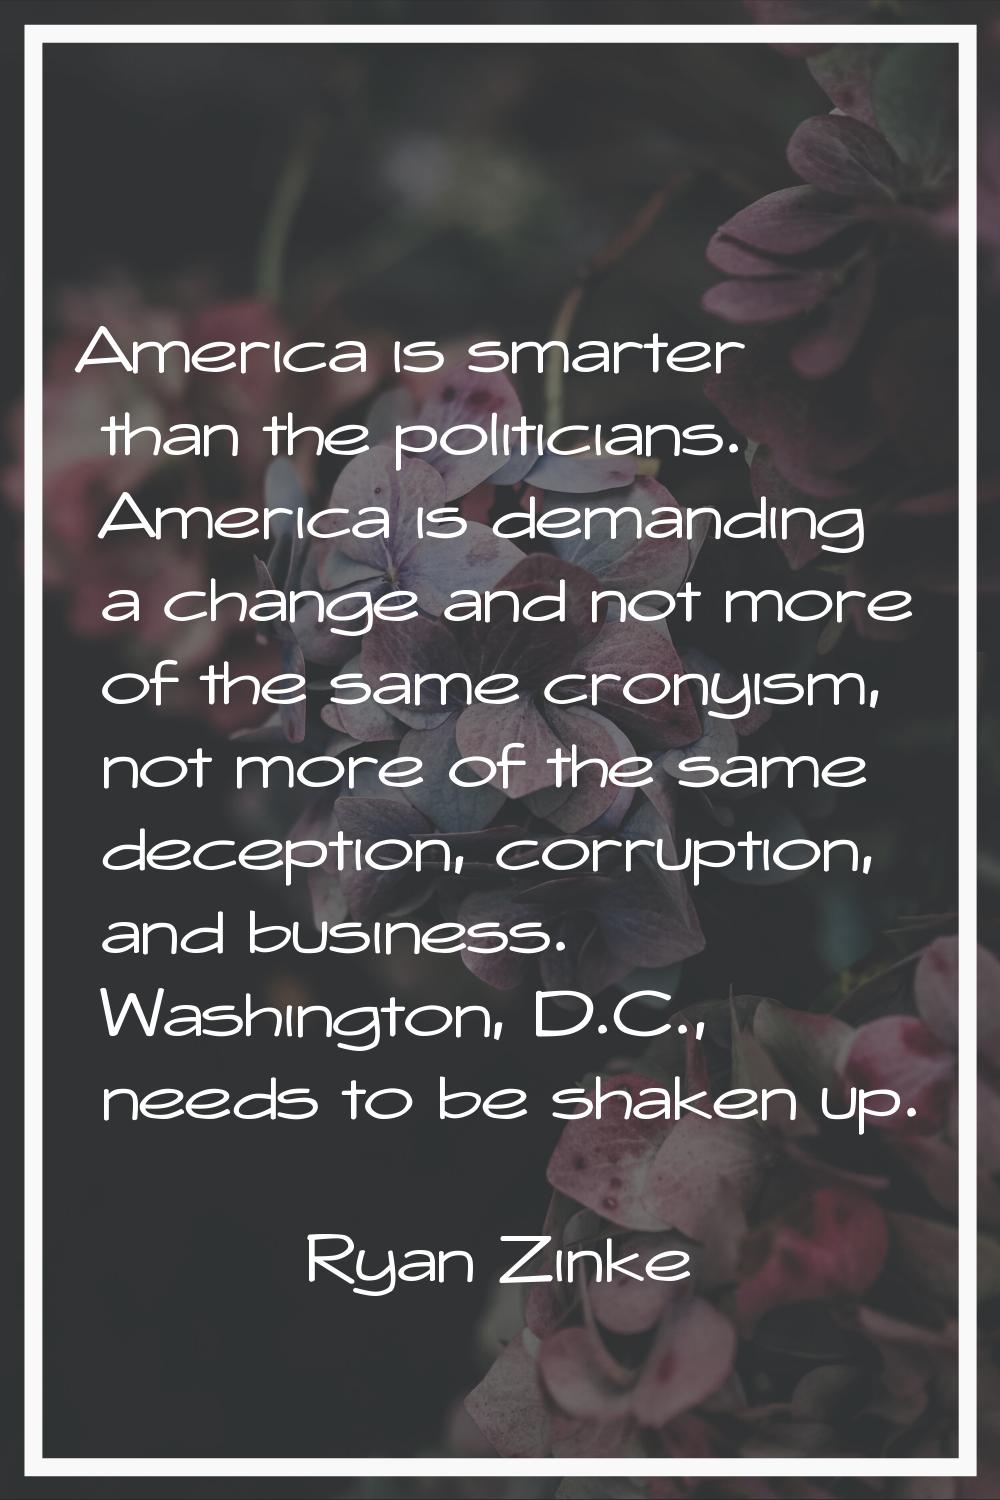 America is smarter than the politicians. America is demanding a change and not more of the same cro